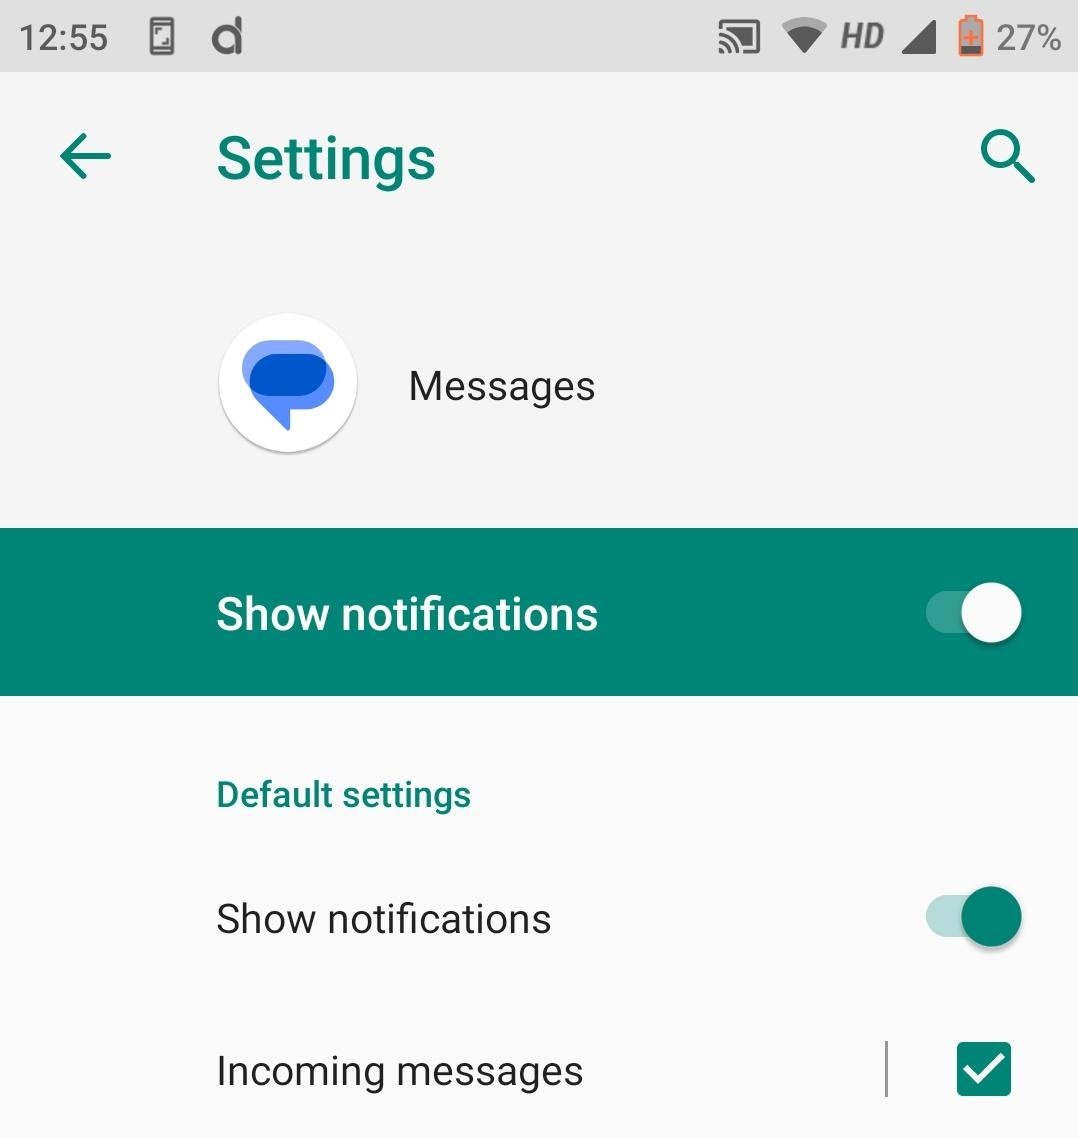 Ensure "Show notifications" is enabled.